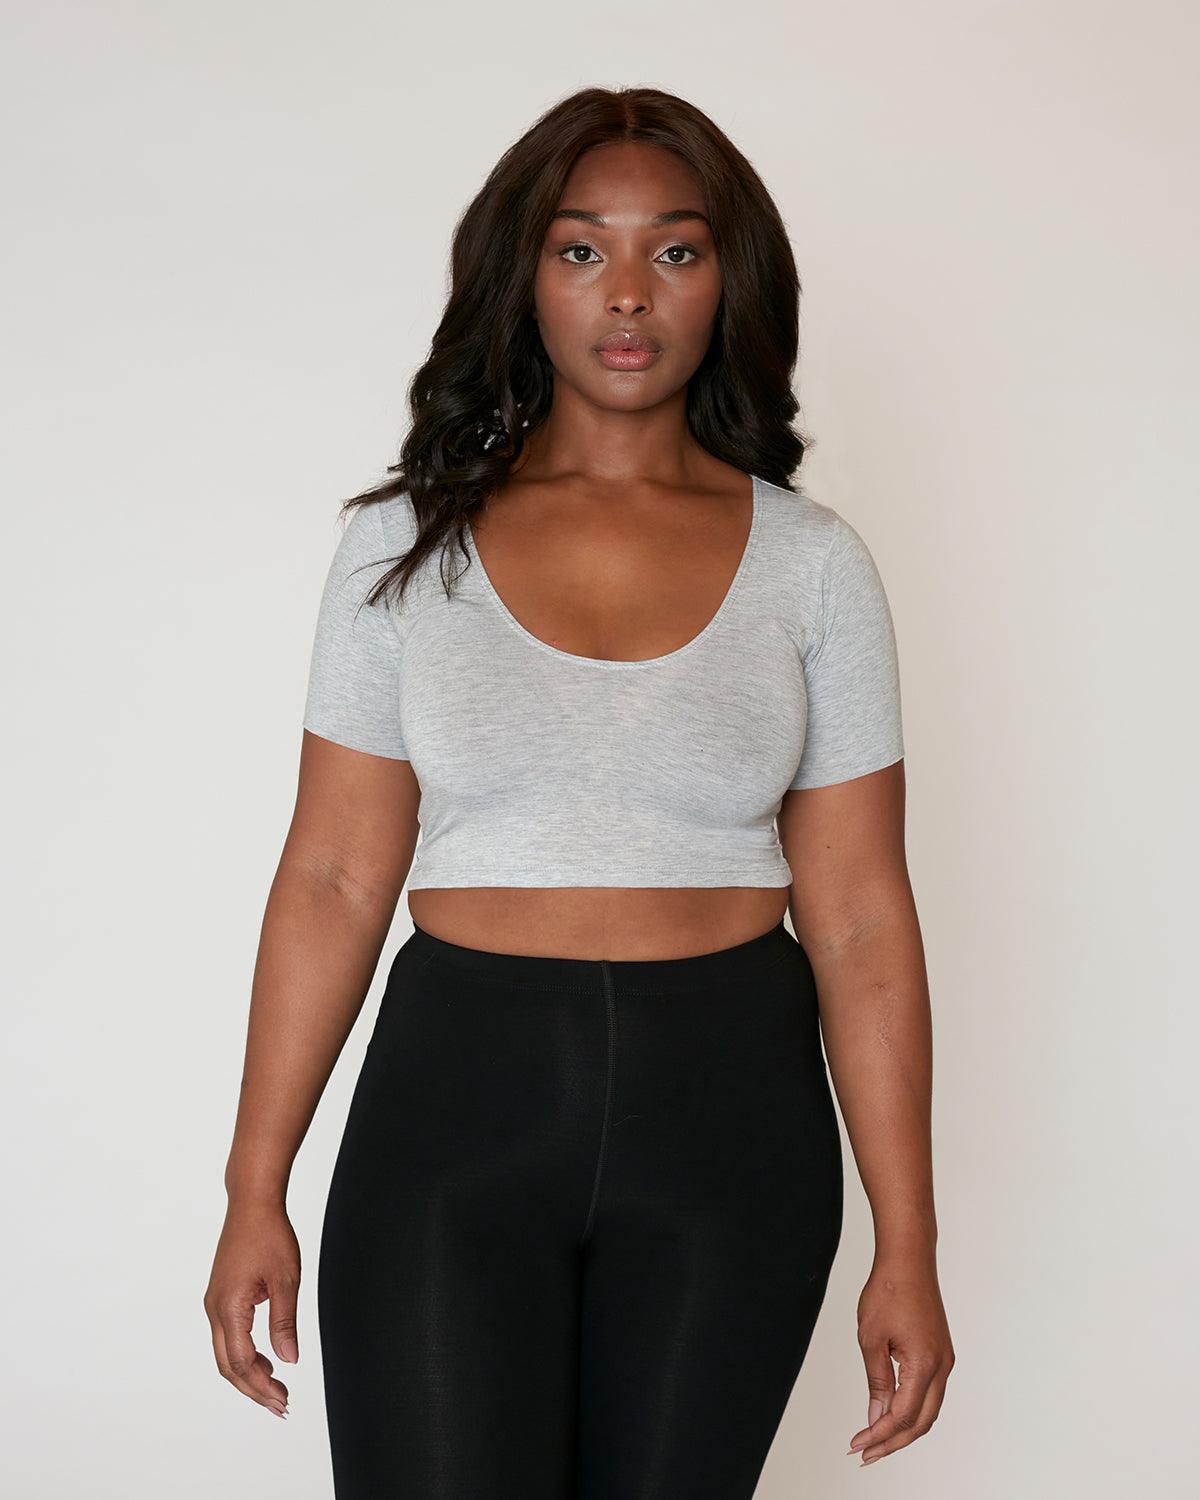 "#color_HEATHER GREY|Tolu is 5'7.5" and wears a size M